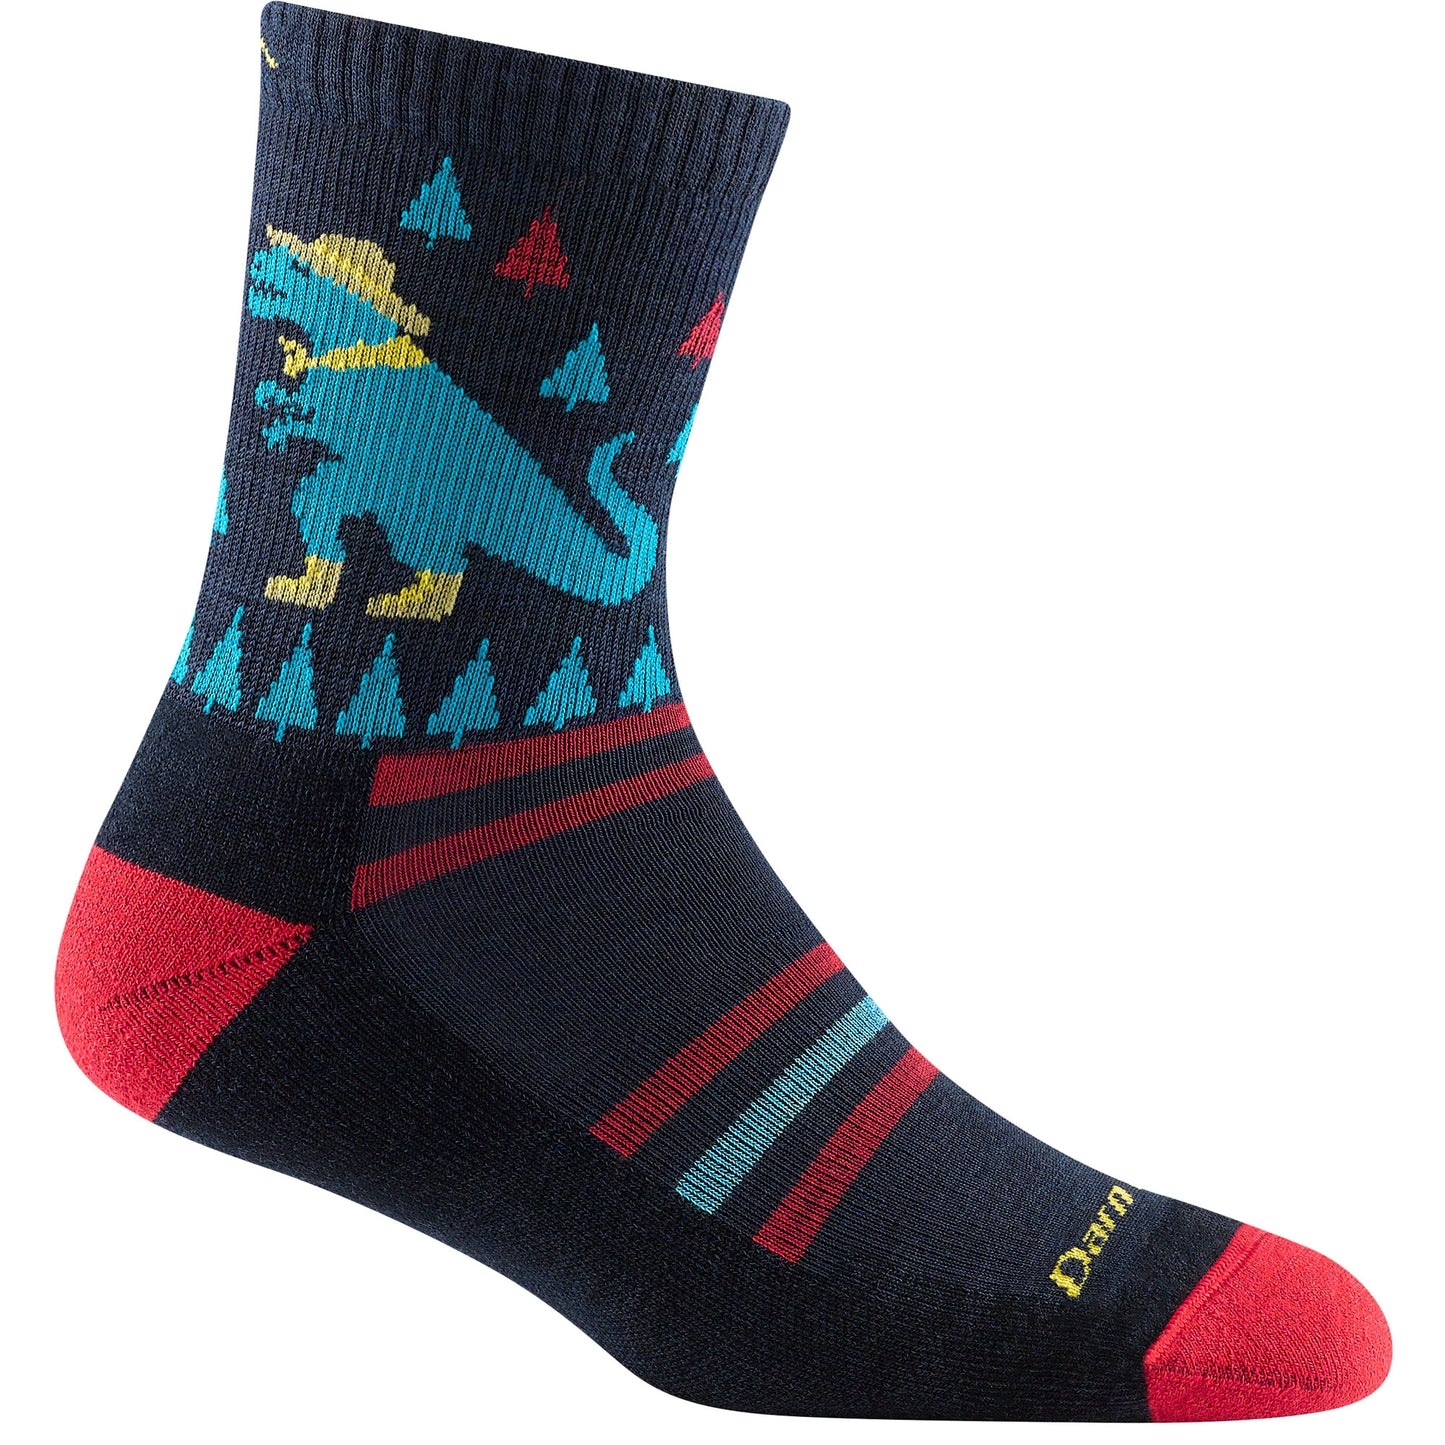 Darn Tough Children's 3038 Eclipse Dino sock - black, light blue, yellow and red